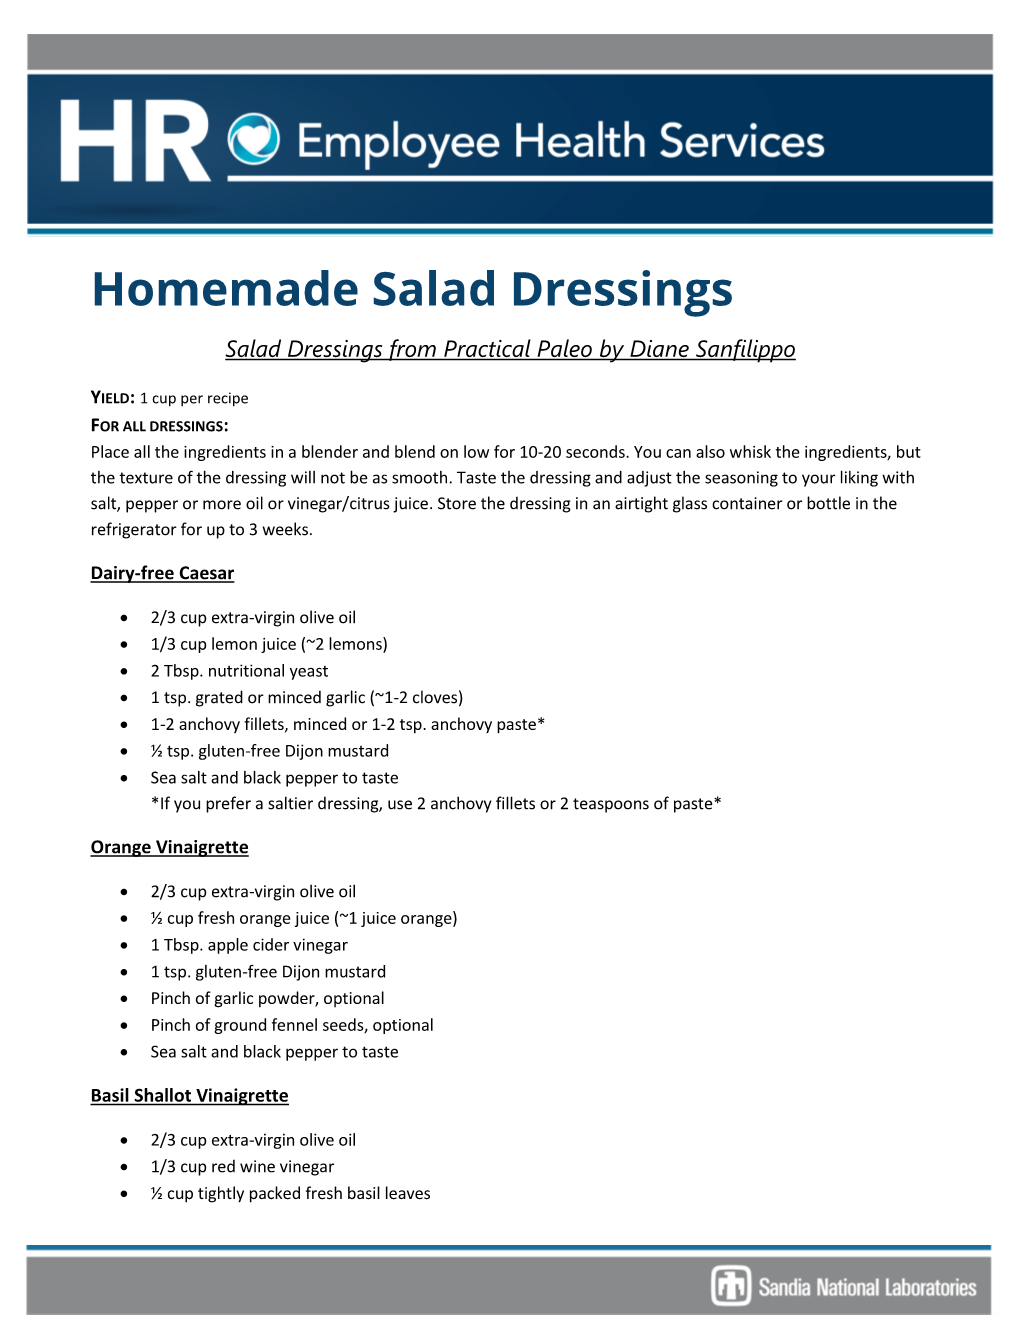 Homemade Salad Dressings Salad Dressings from Practical Paleo by Diane Sanfilippo